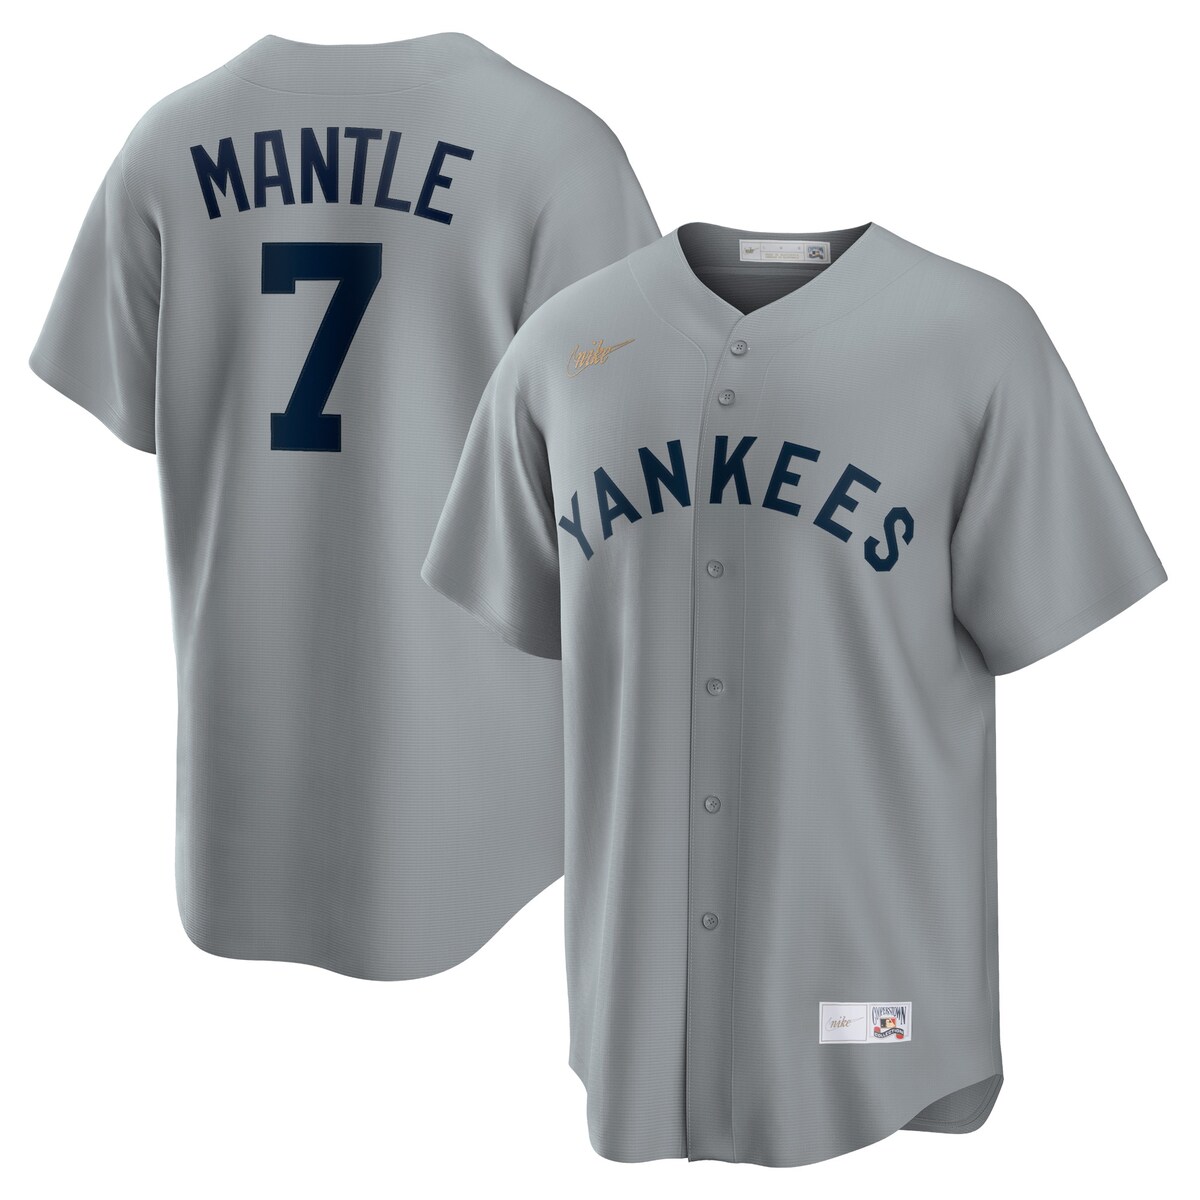 MLB 󥭡 ߥåޥȥ ˥ե Nike ʥ  쥤 (MLB Nike Men's Official Cooperstown Player Jersey)